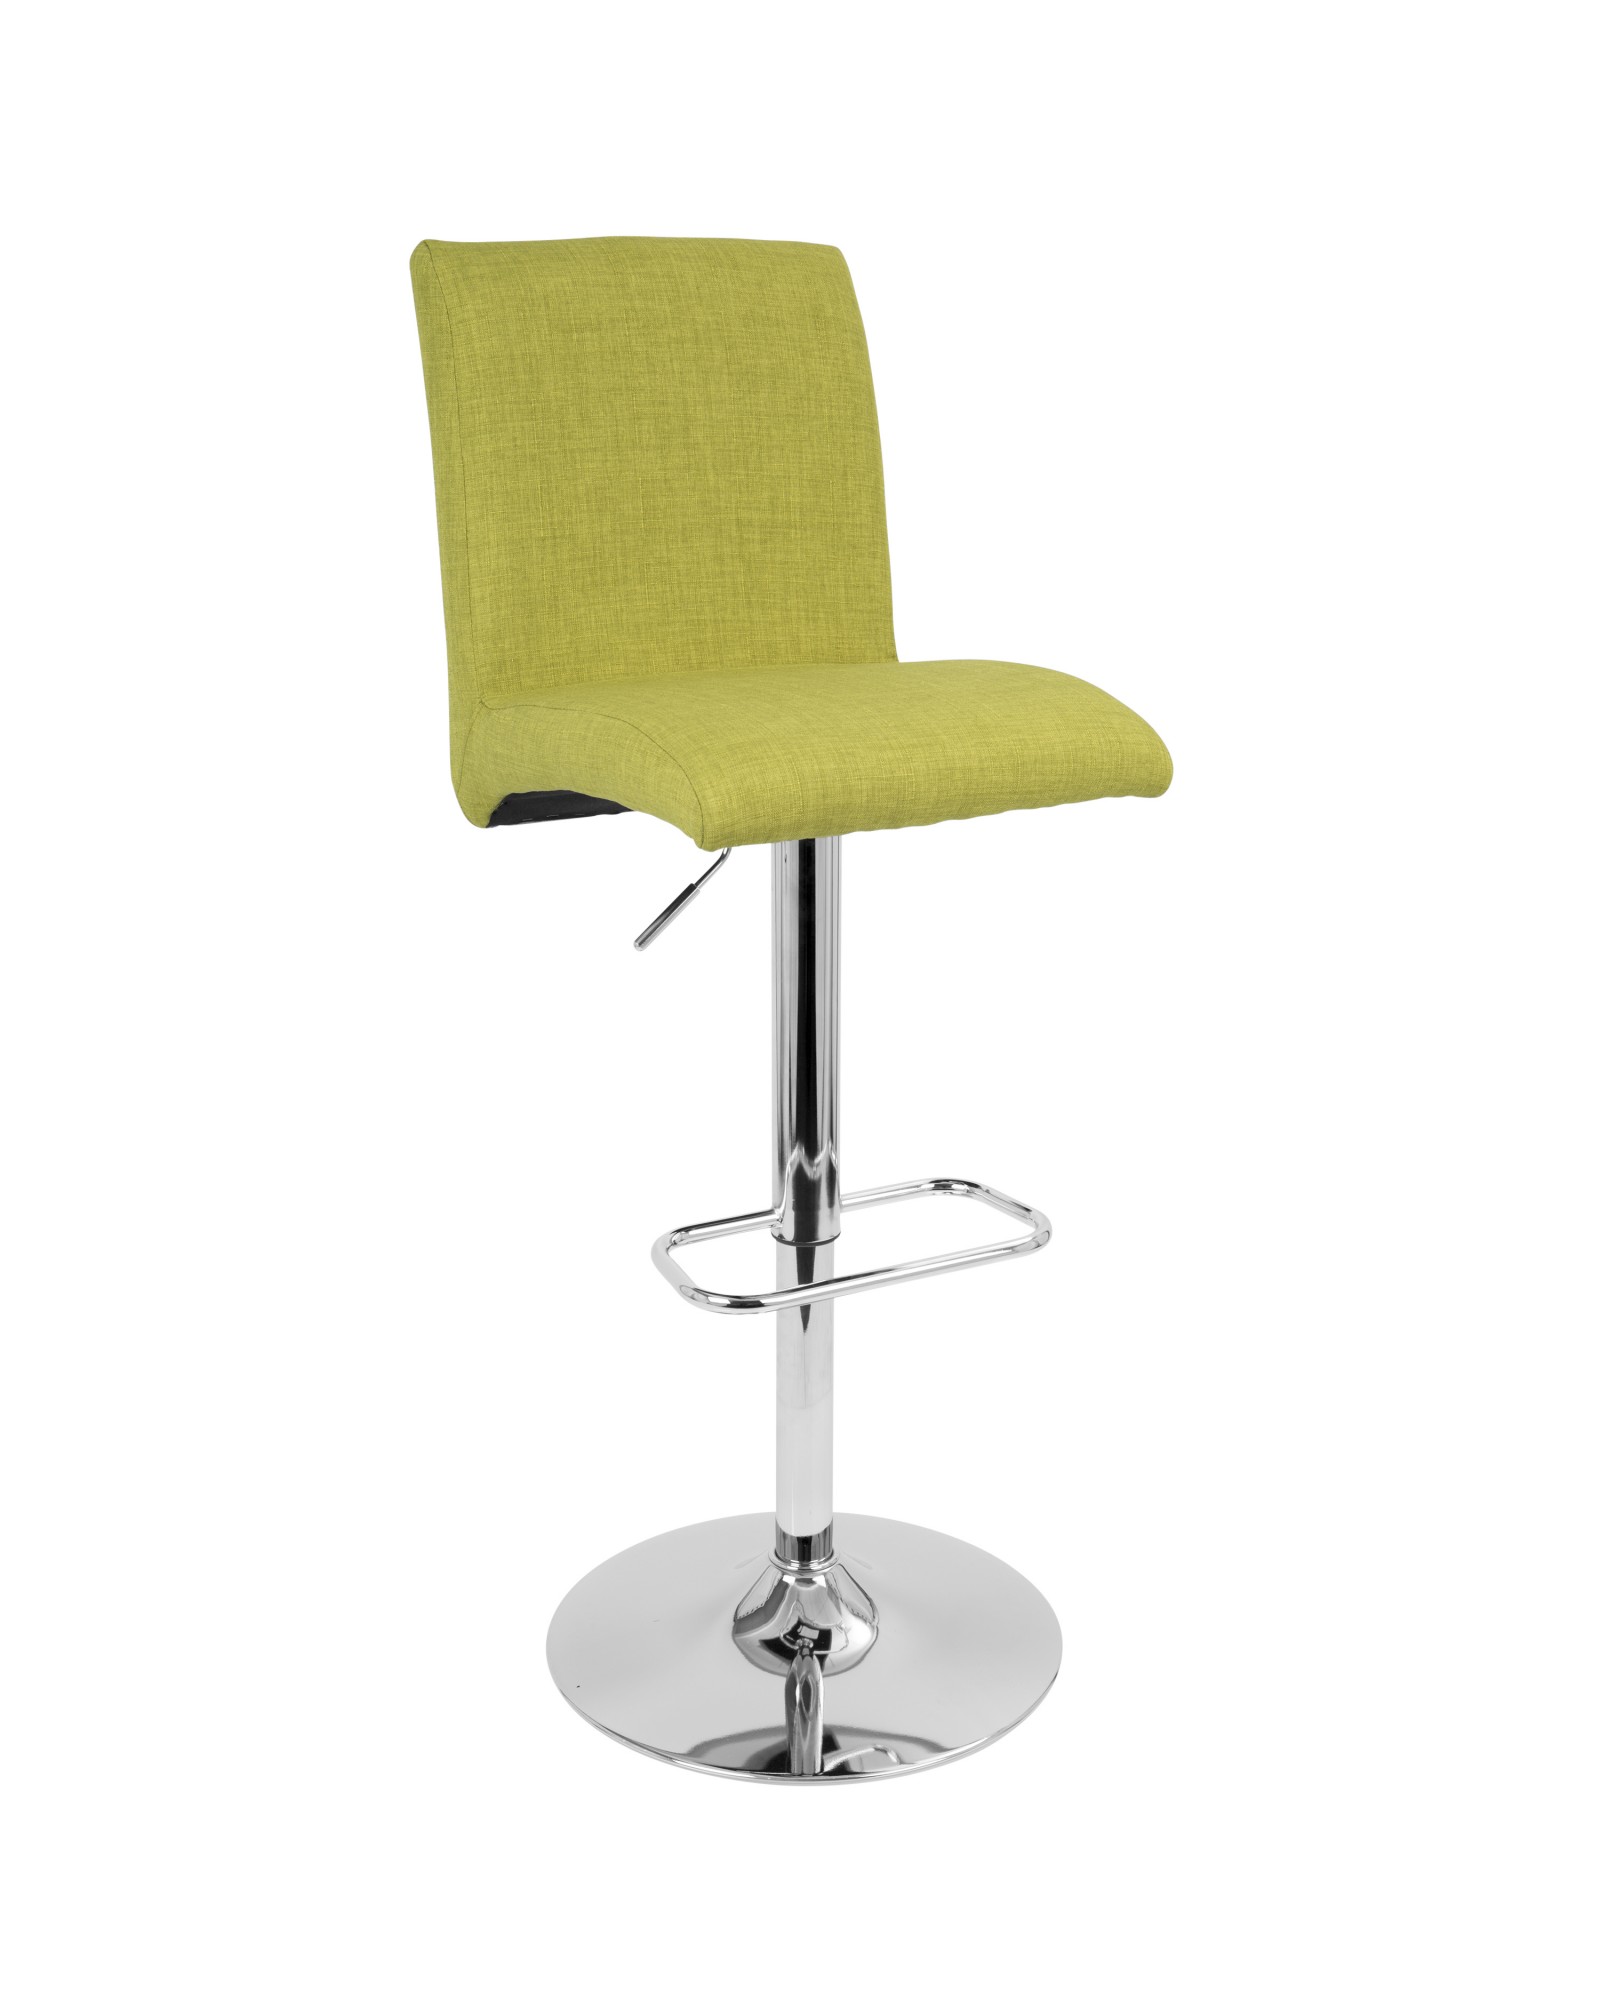 Tintori Contemporary Adjustable Barstool with Swivel in Green